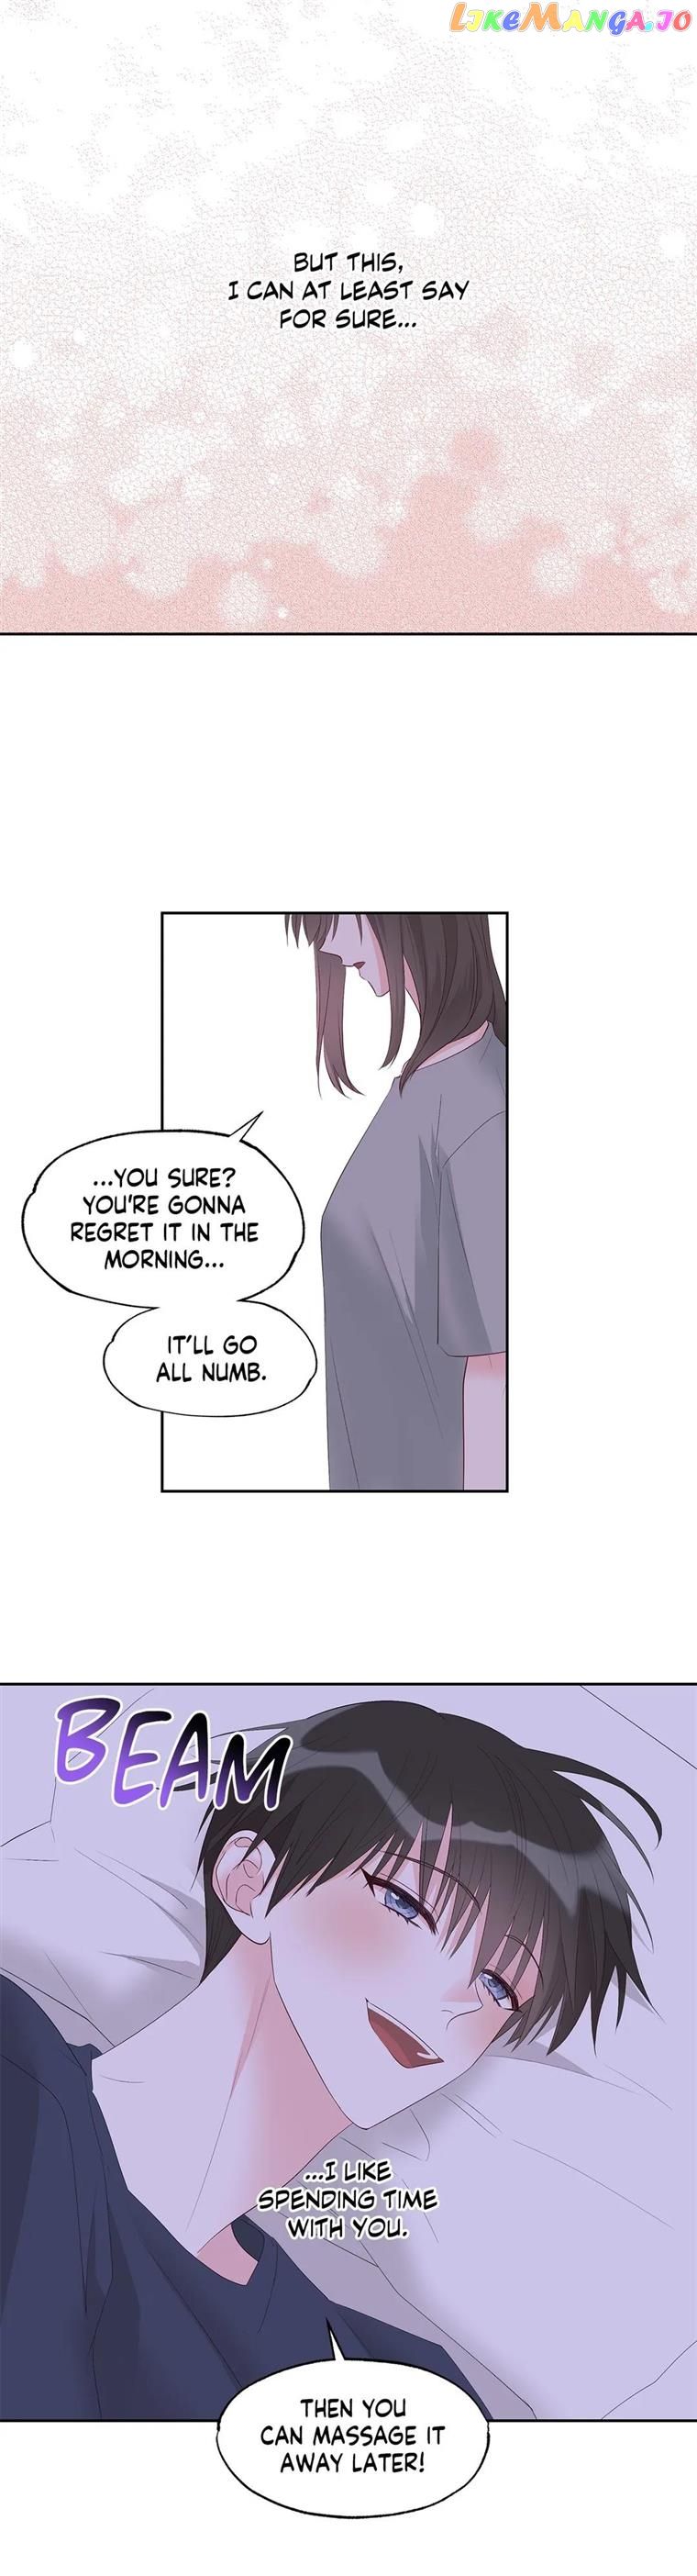 Learning to Love You chapter 47 - Page 31